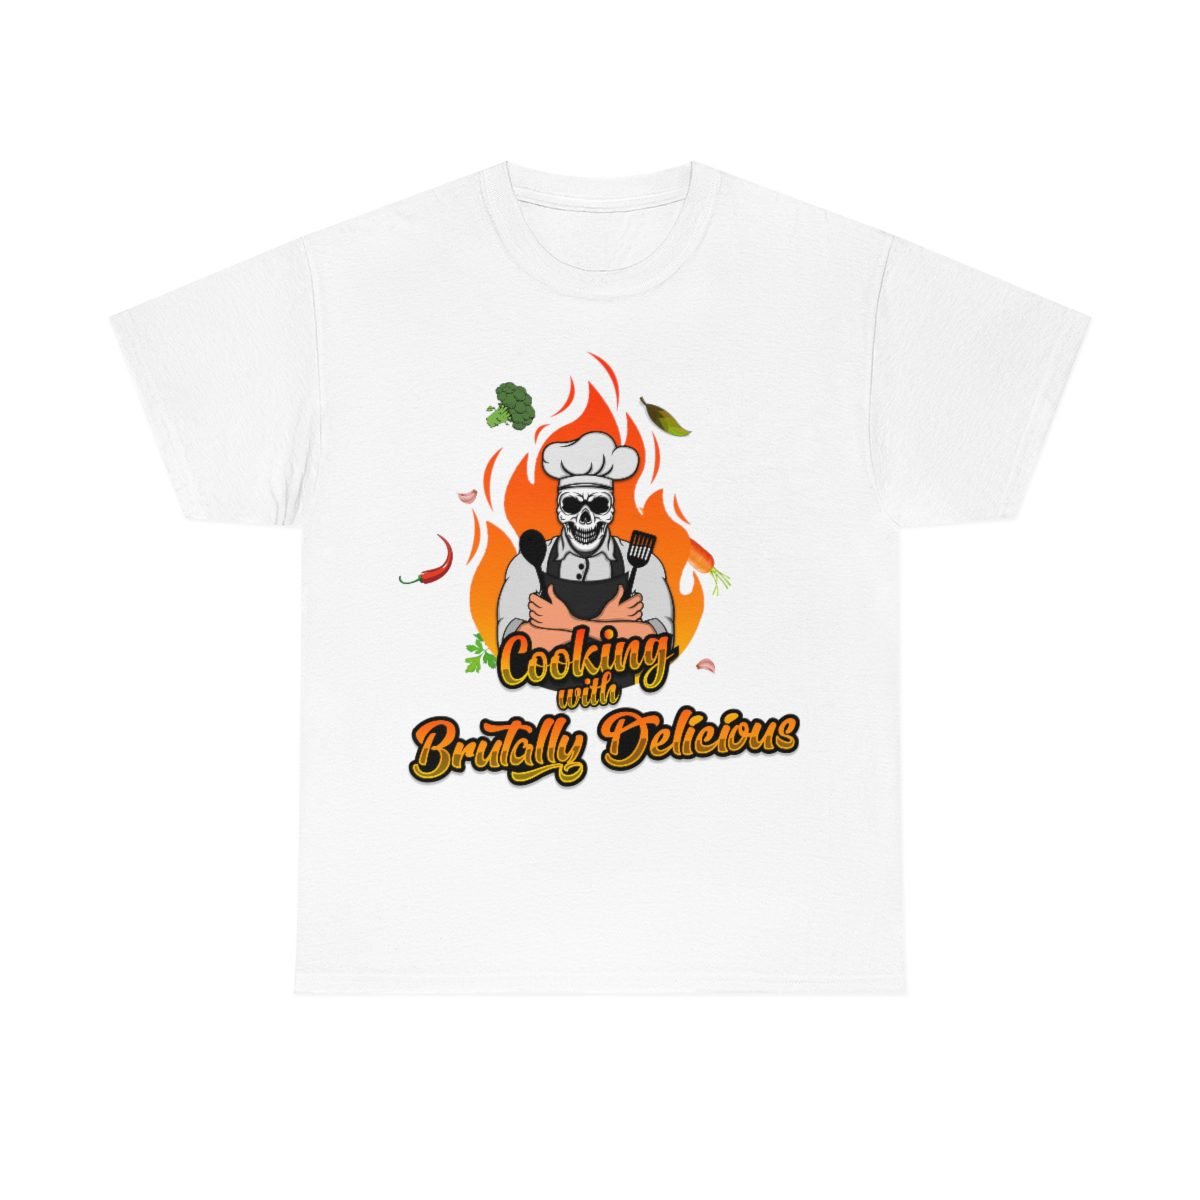 Brutally Delicious – Cooking With Brutally Delicious Short Sleeve Tshirt